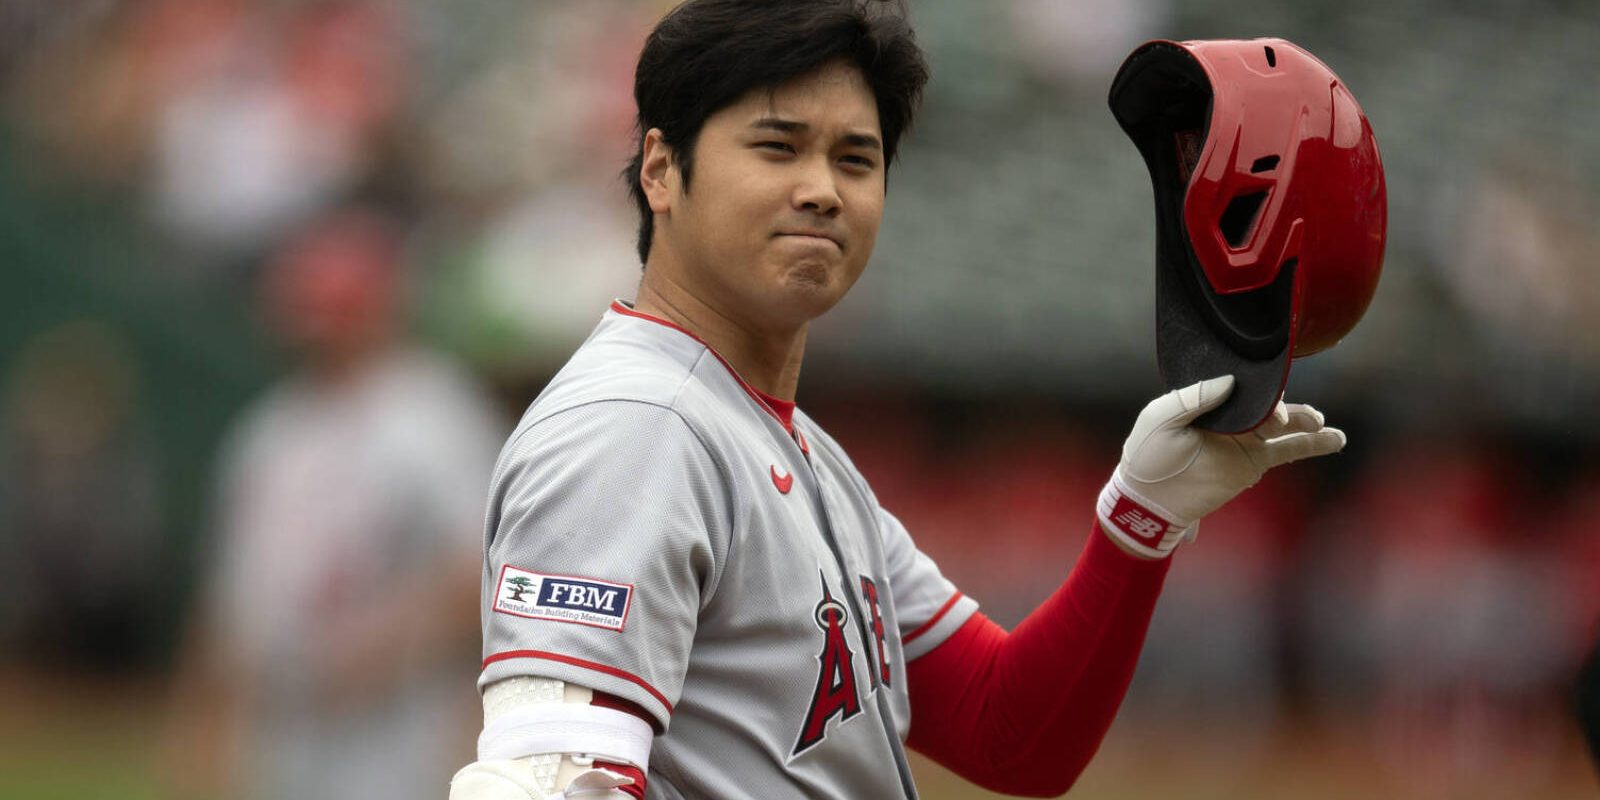 Sep 2, 2023; Oakland, California, USA; Los Angeles Angels designated hitter Shohei Ohtani (17) requests time while batting against the Oakland Athletics during the first inning at Oakland-Alameda County Coliseum. Mandatory Credit: D. Ross Cameron-USA TODAY Sports